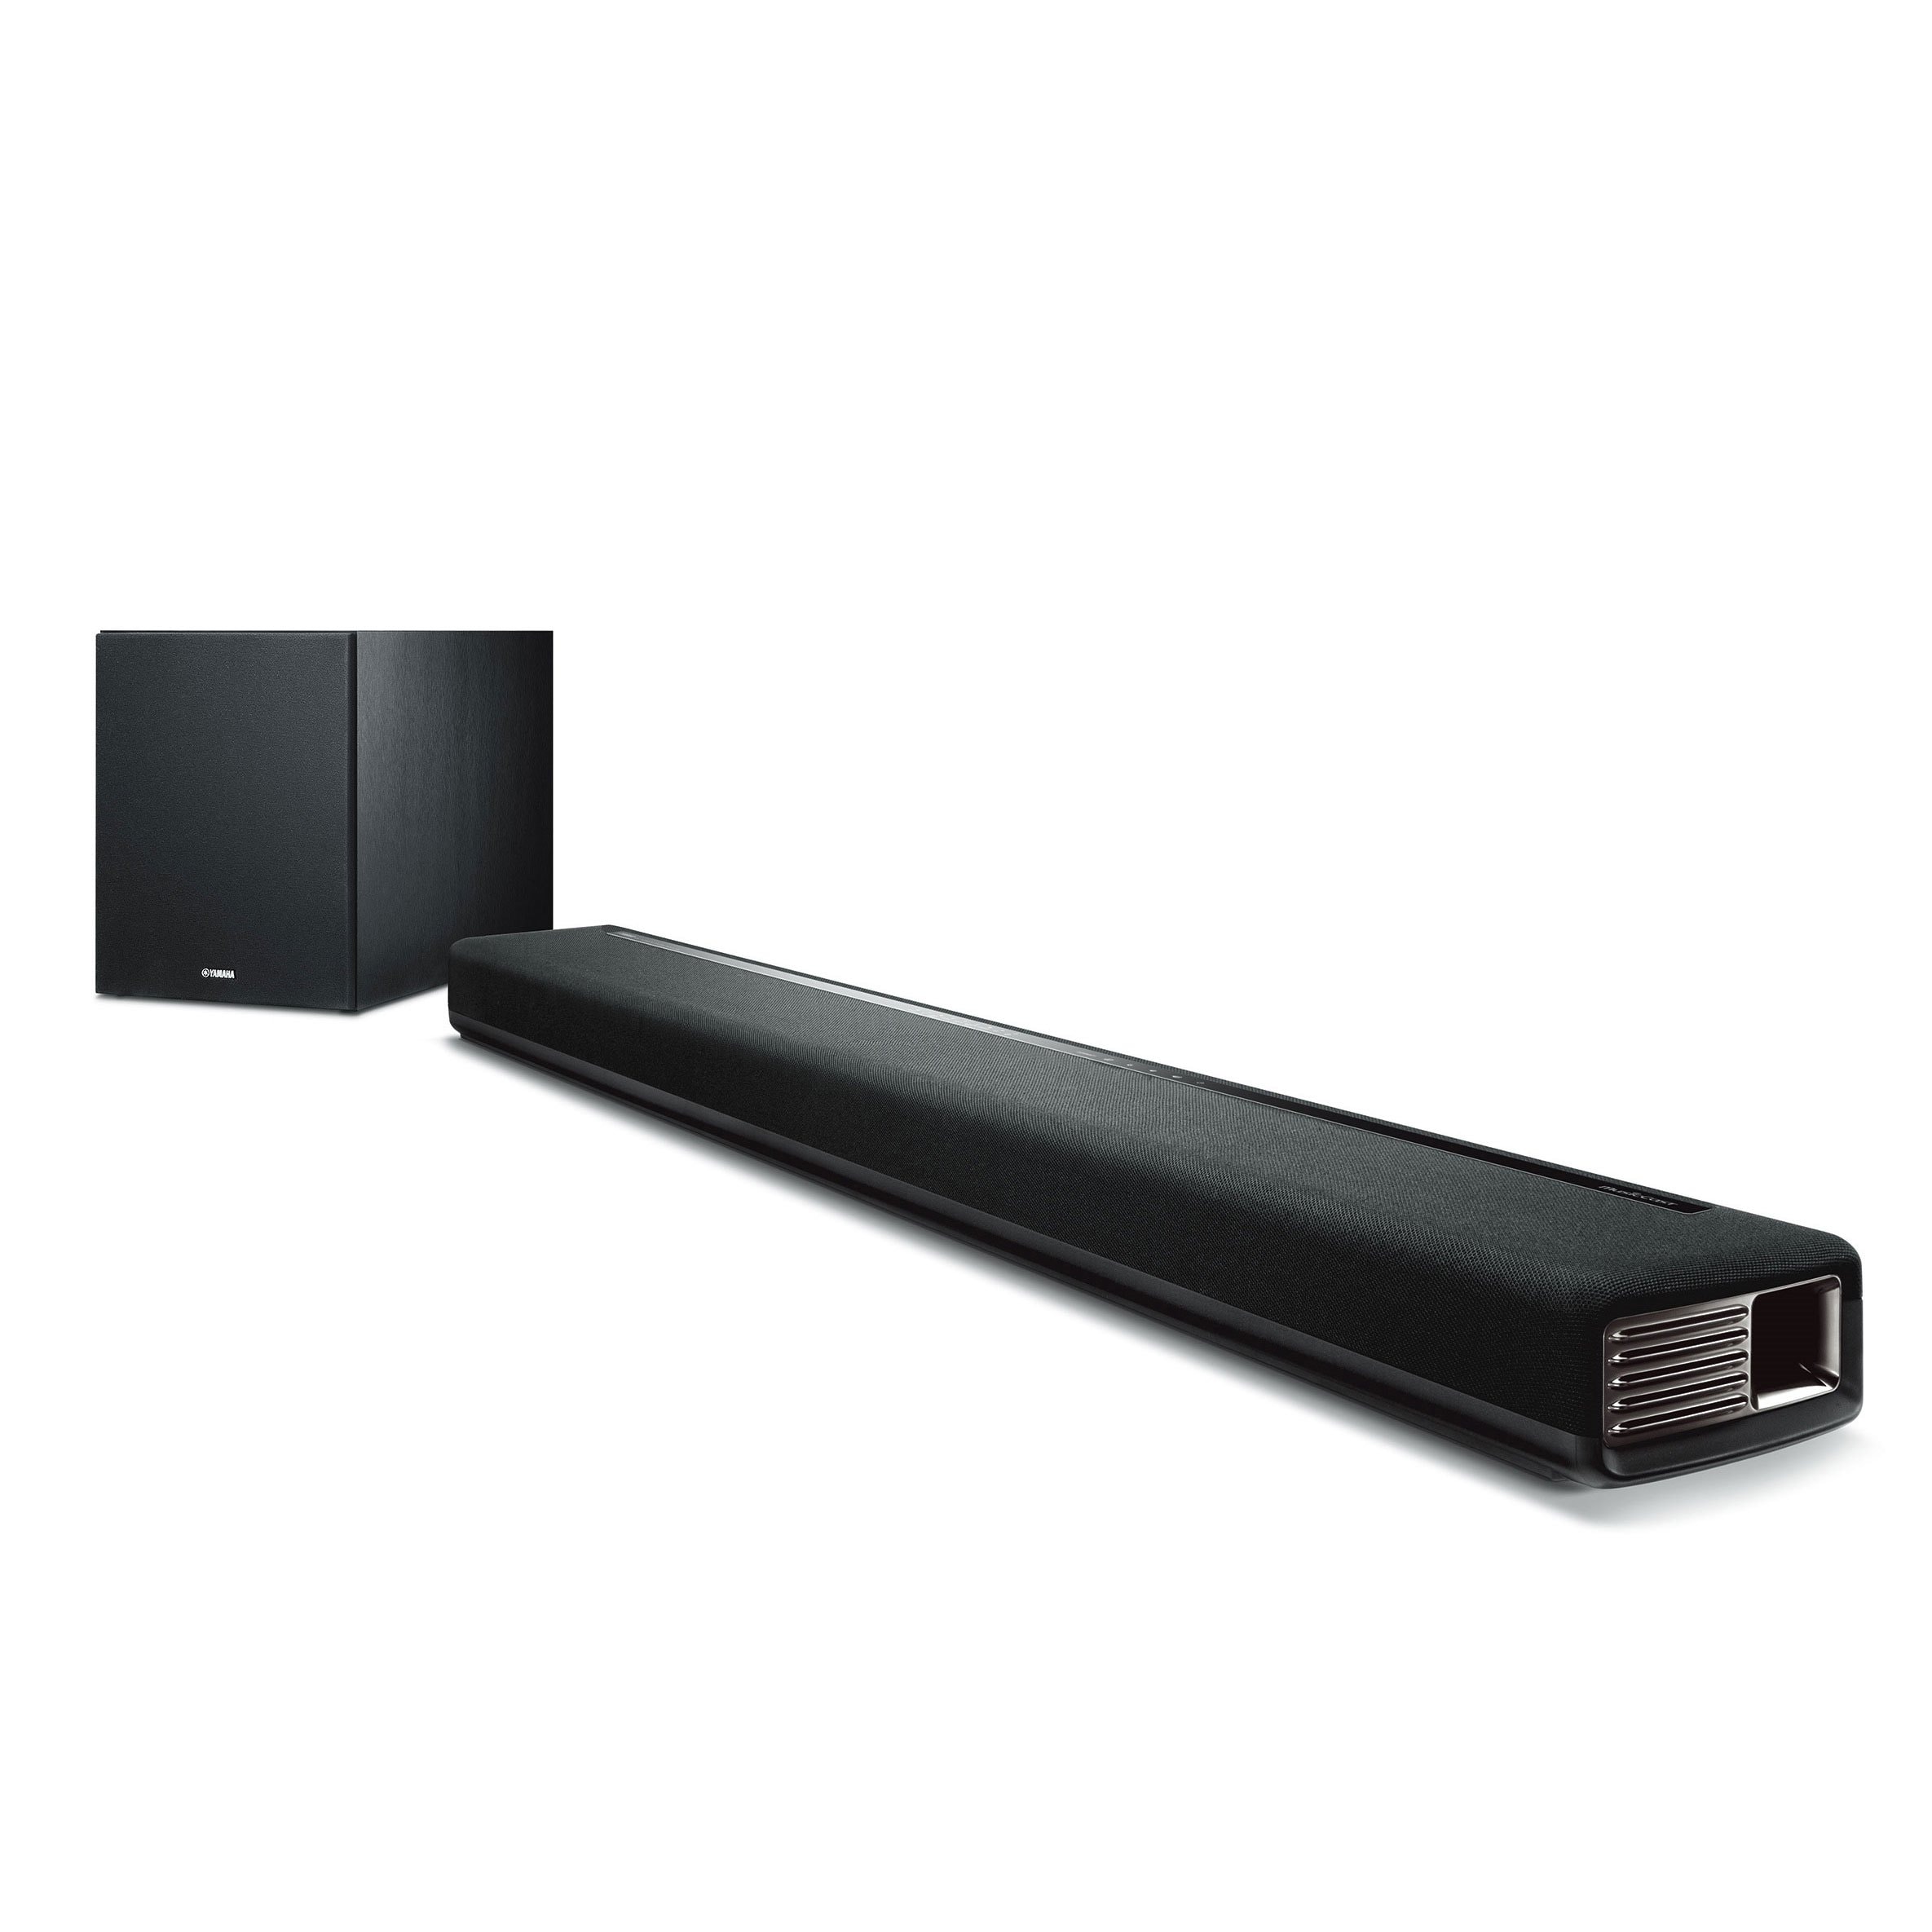 YAS-706 - Overview - Sound Bars - Audio & Visual - Products ...